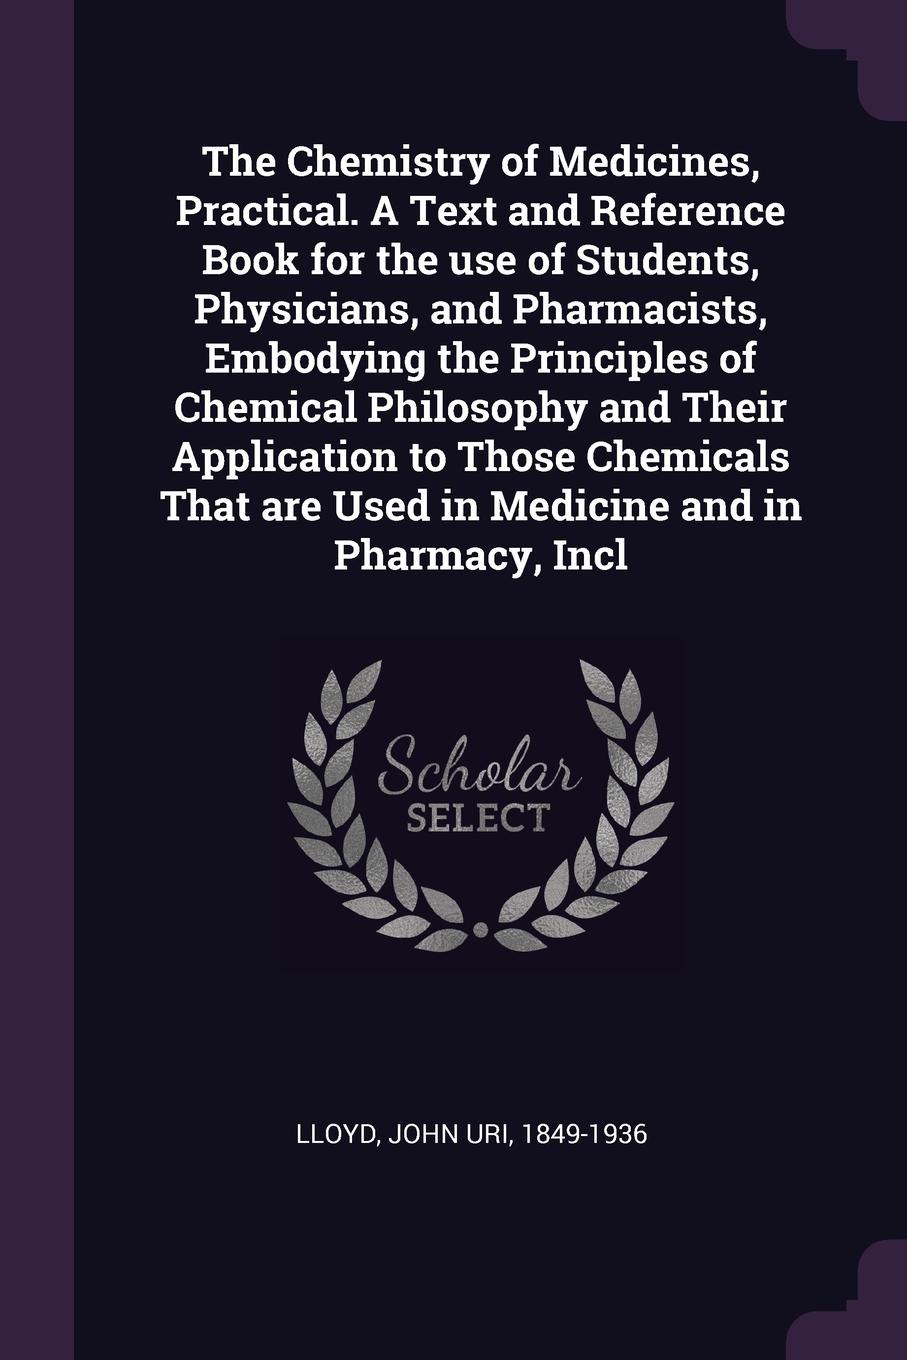 The Chemistry of Medicines, Practical. A Text and Reference Book for the use of Students, Physicians, and Pharmacists, Embodying the Principles of Chemical Philosophy and Their Application to Those Chemicals That are Used in Medicine and in Pharma...